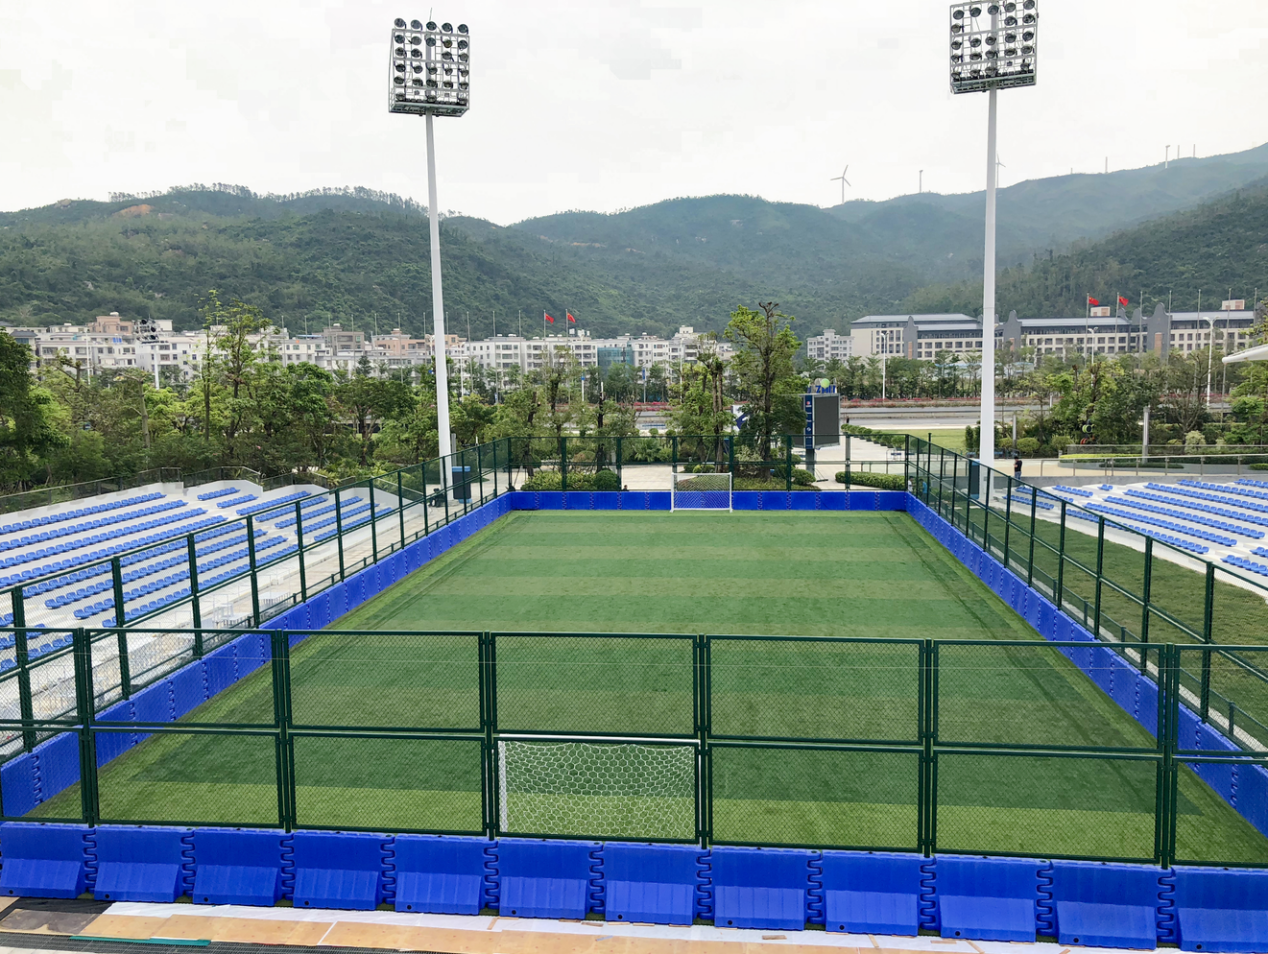 https://www.alibaba.com/product-detail/Outdoor-Customized-Panna-Soccer-Cage-Football_1600314346667.html?spm=a2747.manage.0.0.2bf571d2SEyQm2